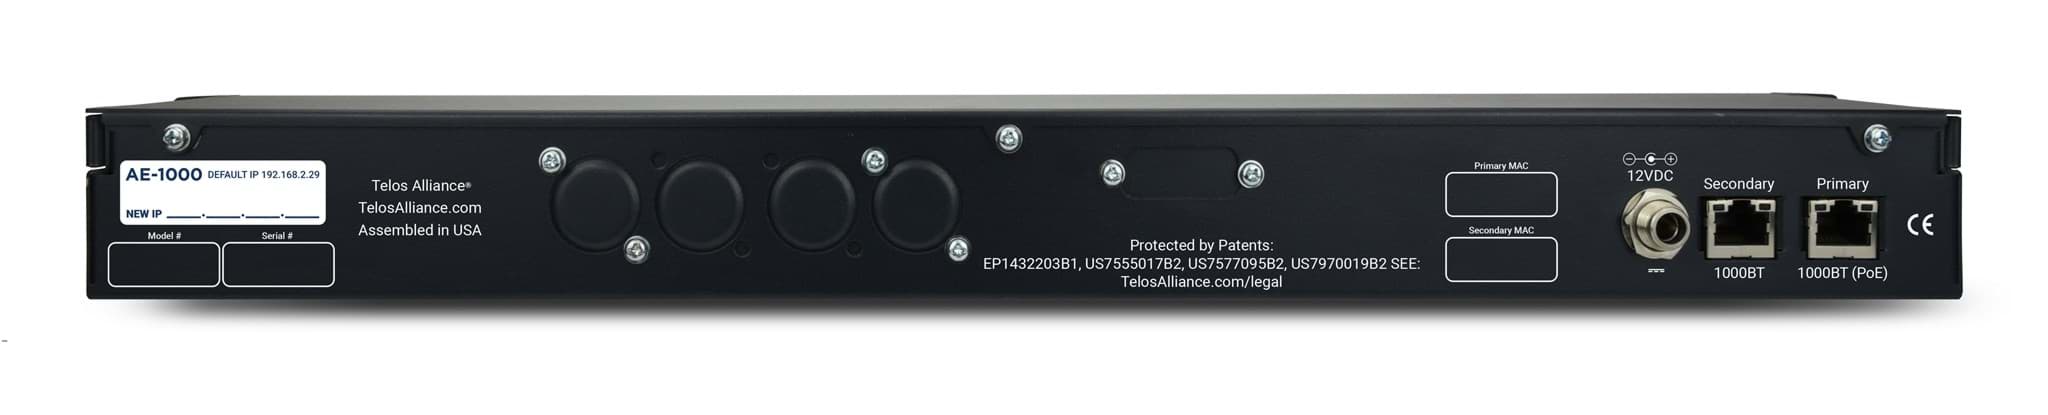 The Telos Alliance AE-1000 is a compact and small device, ideal for a rack